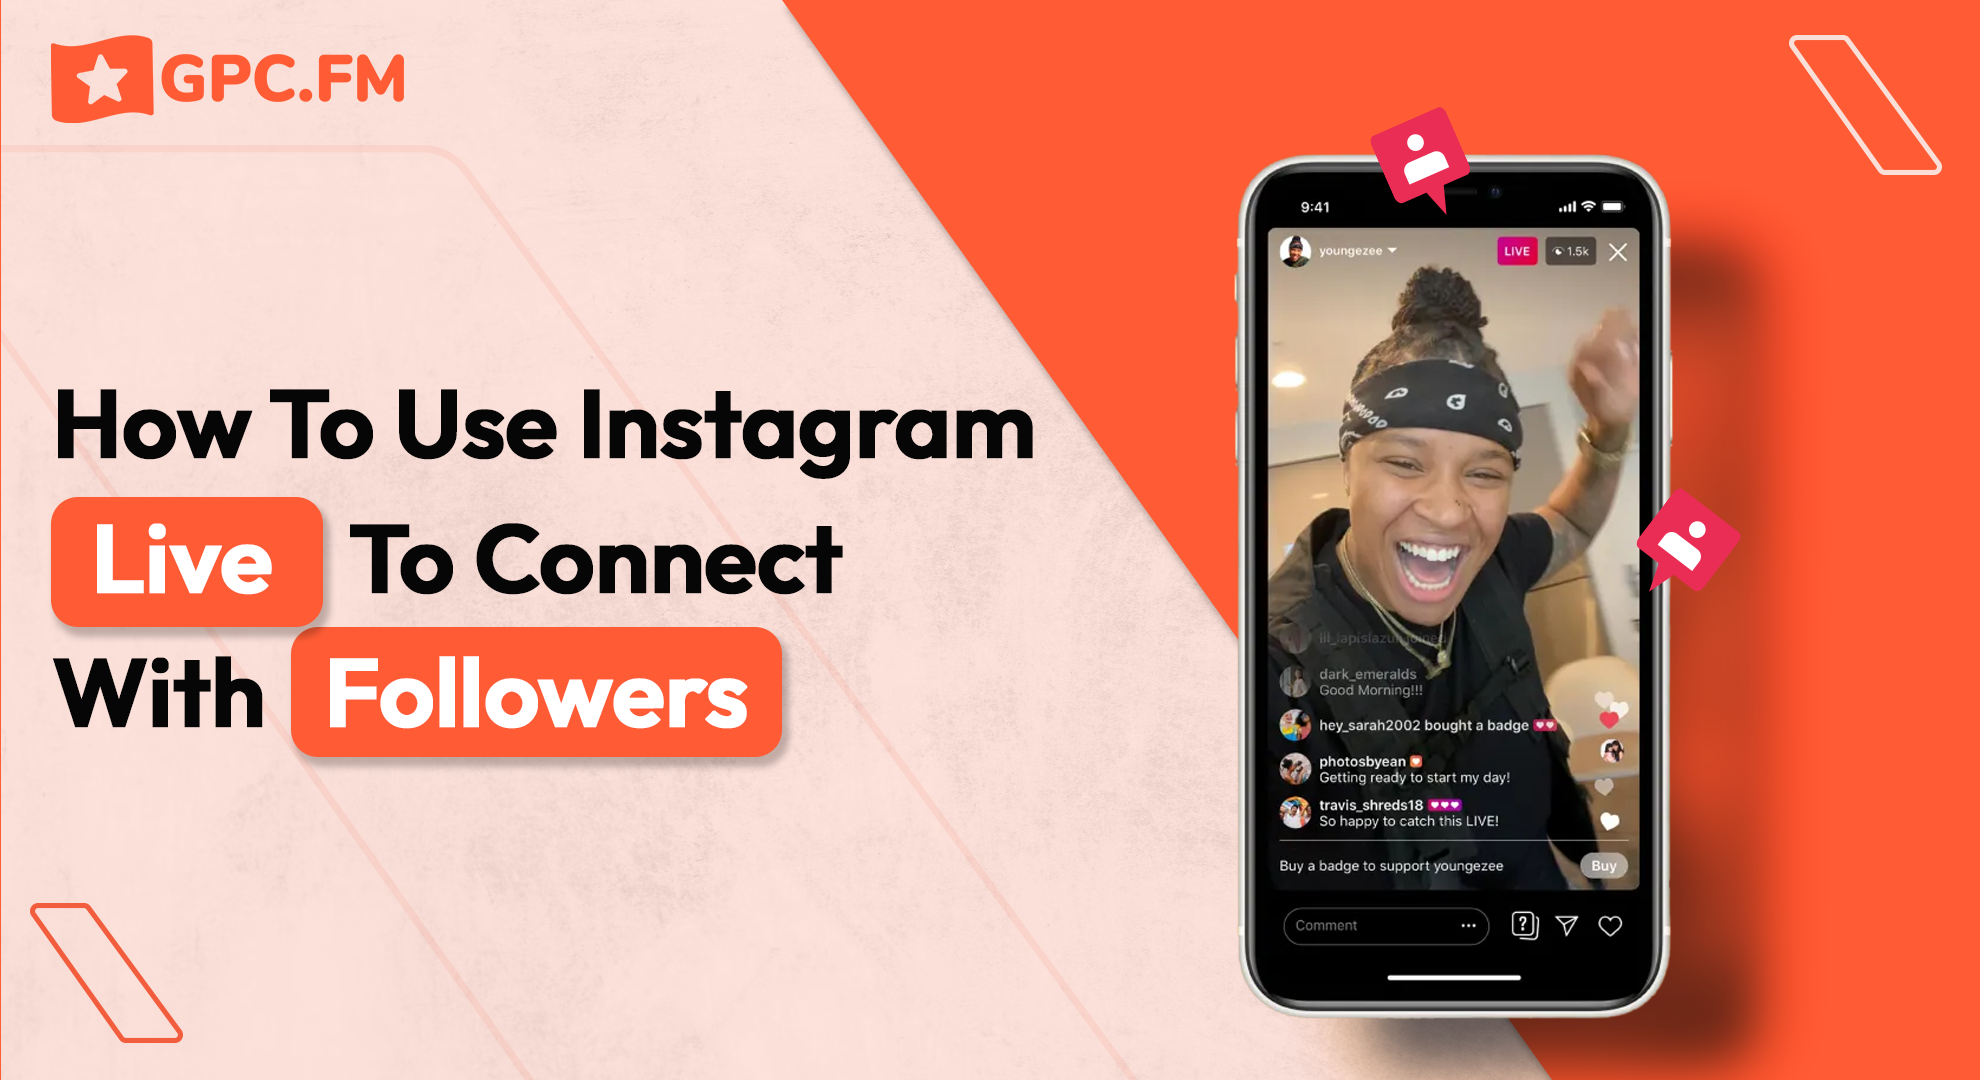 How To Use Instagram Live To Connect With Followers